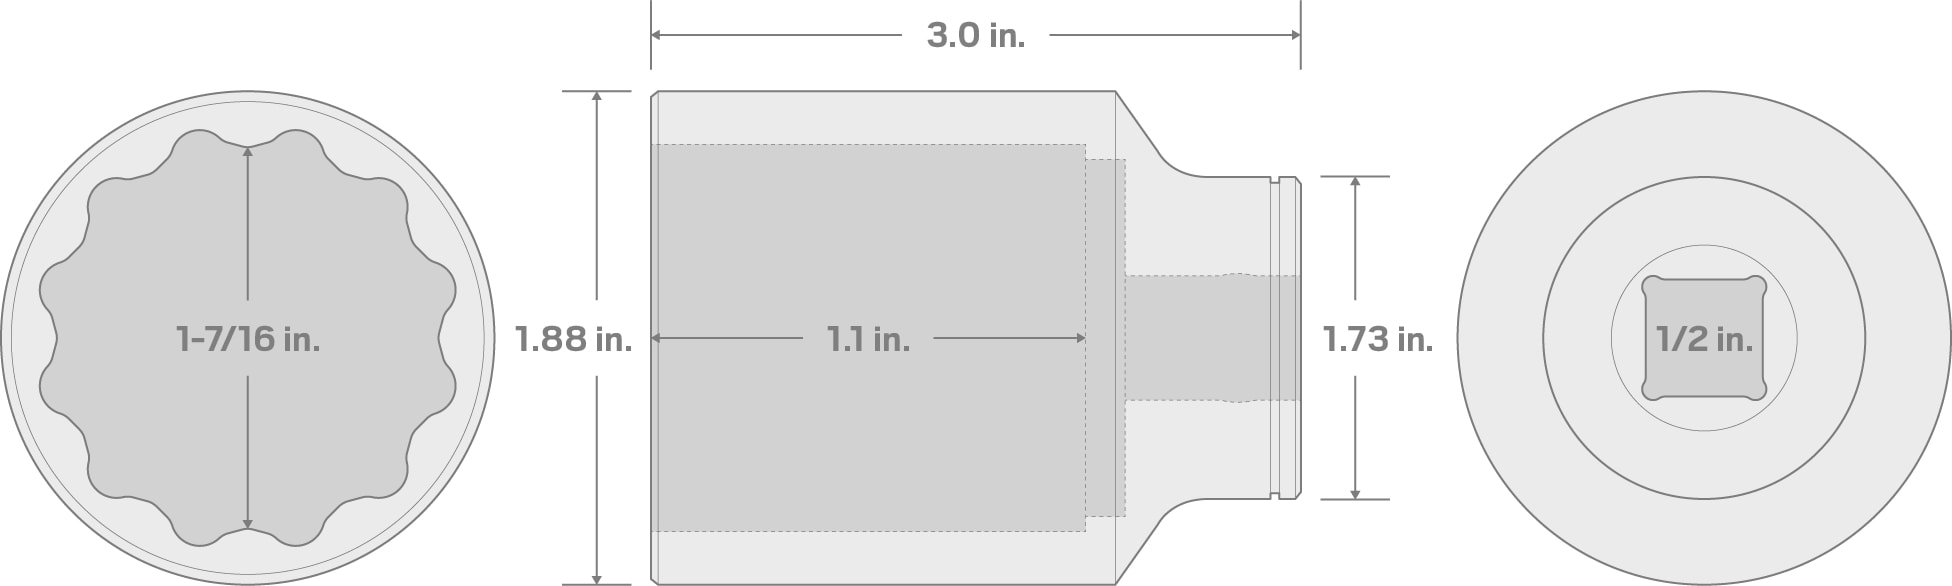 Specs for 1/2 Inch Drive x 1-7/16 Inch Deep 12-Point Socket